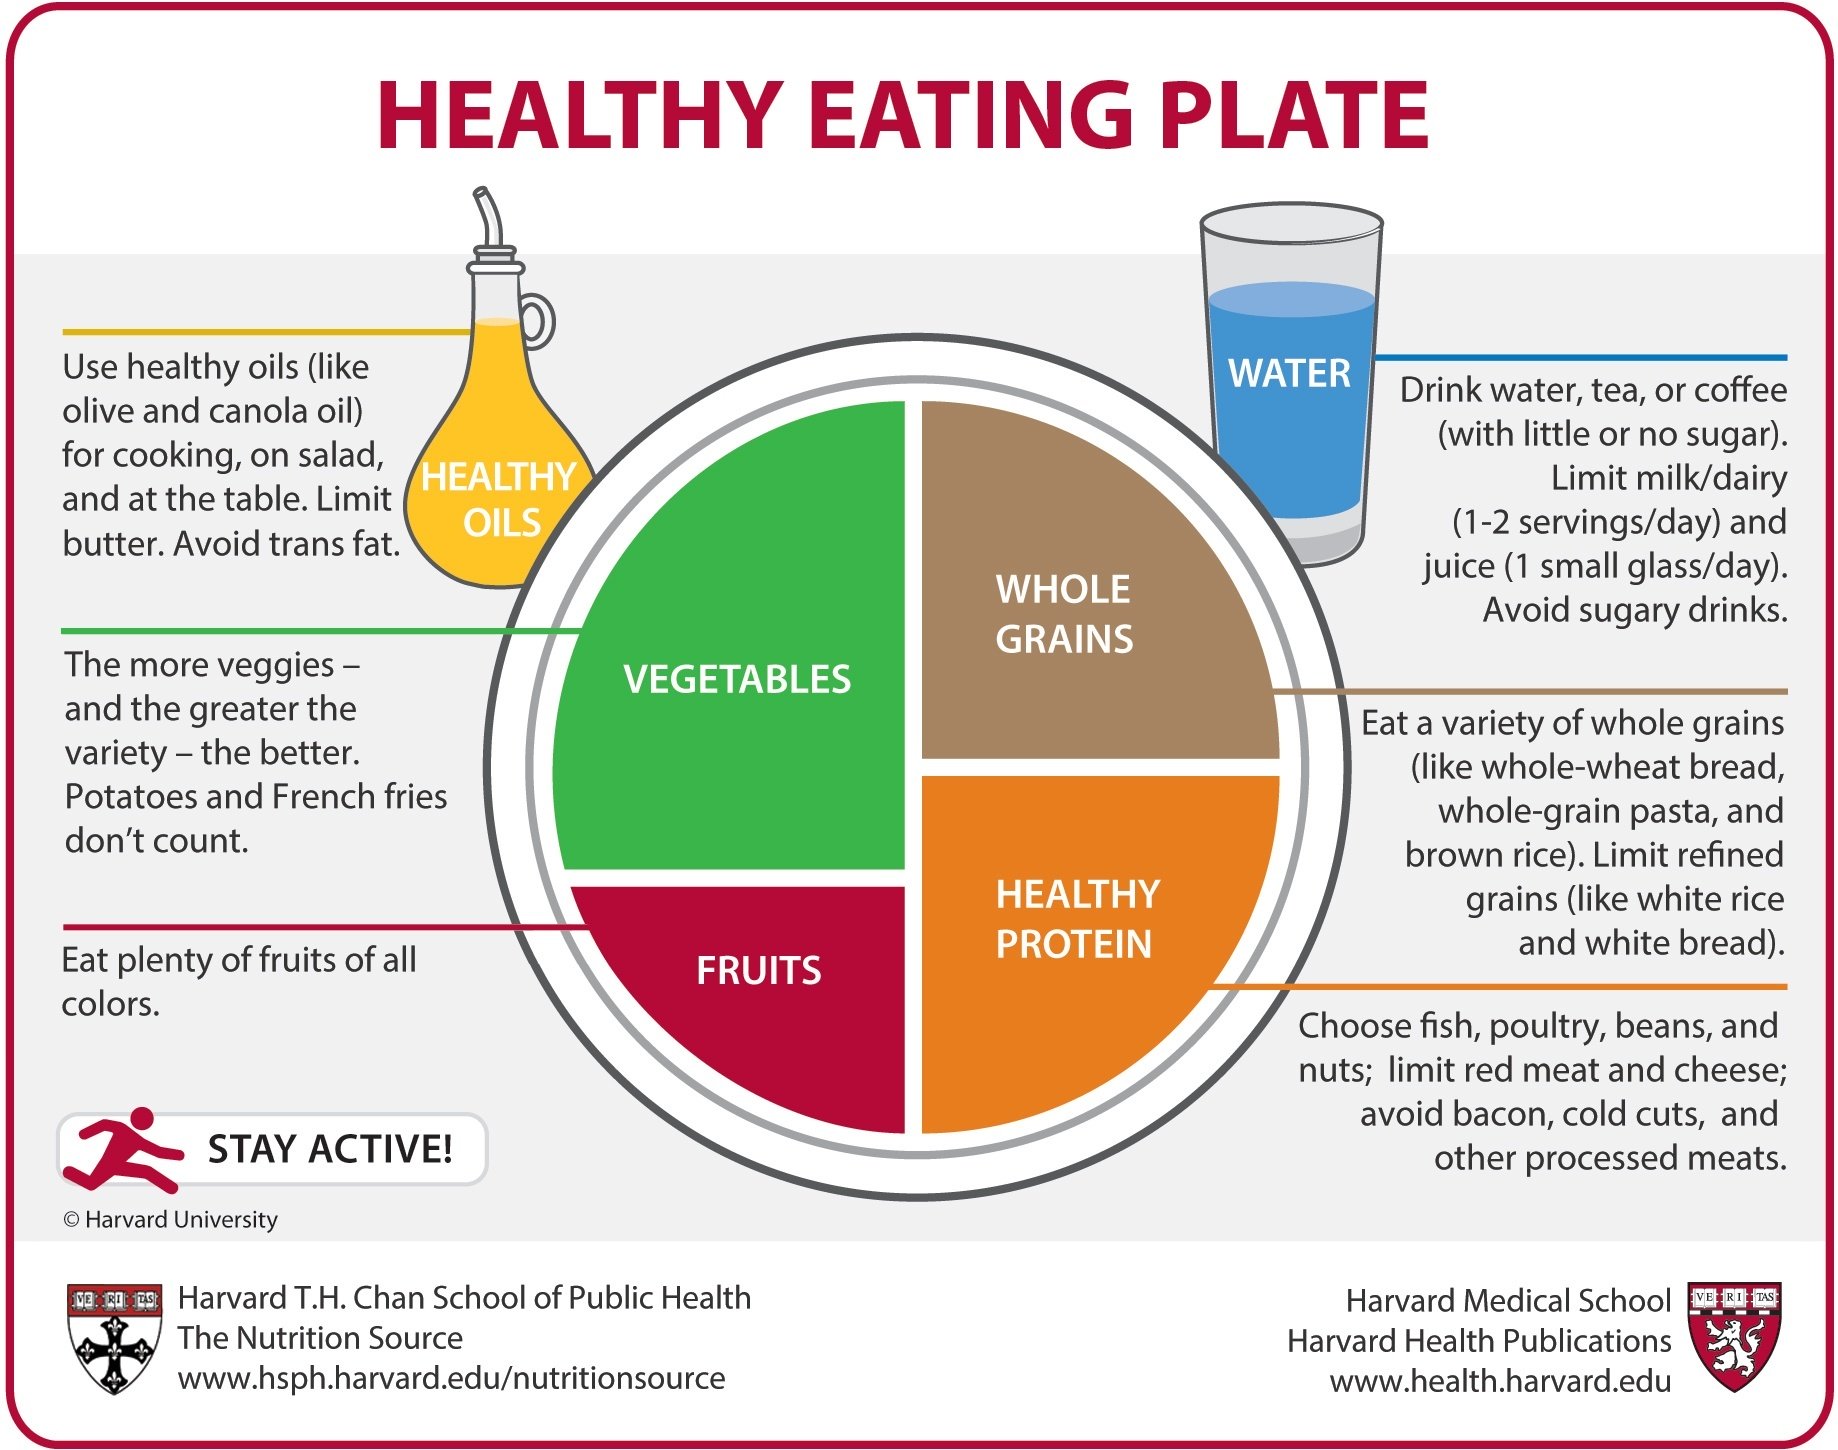 Healthy eating plate. https://www.info-on-high-blood-pressure.com/Eat-Well.html